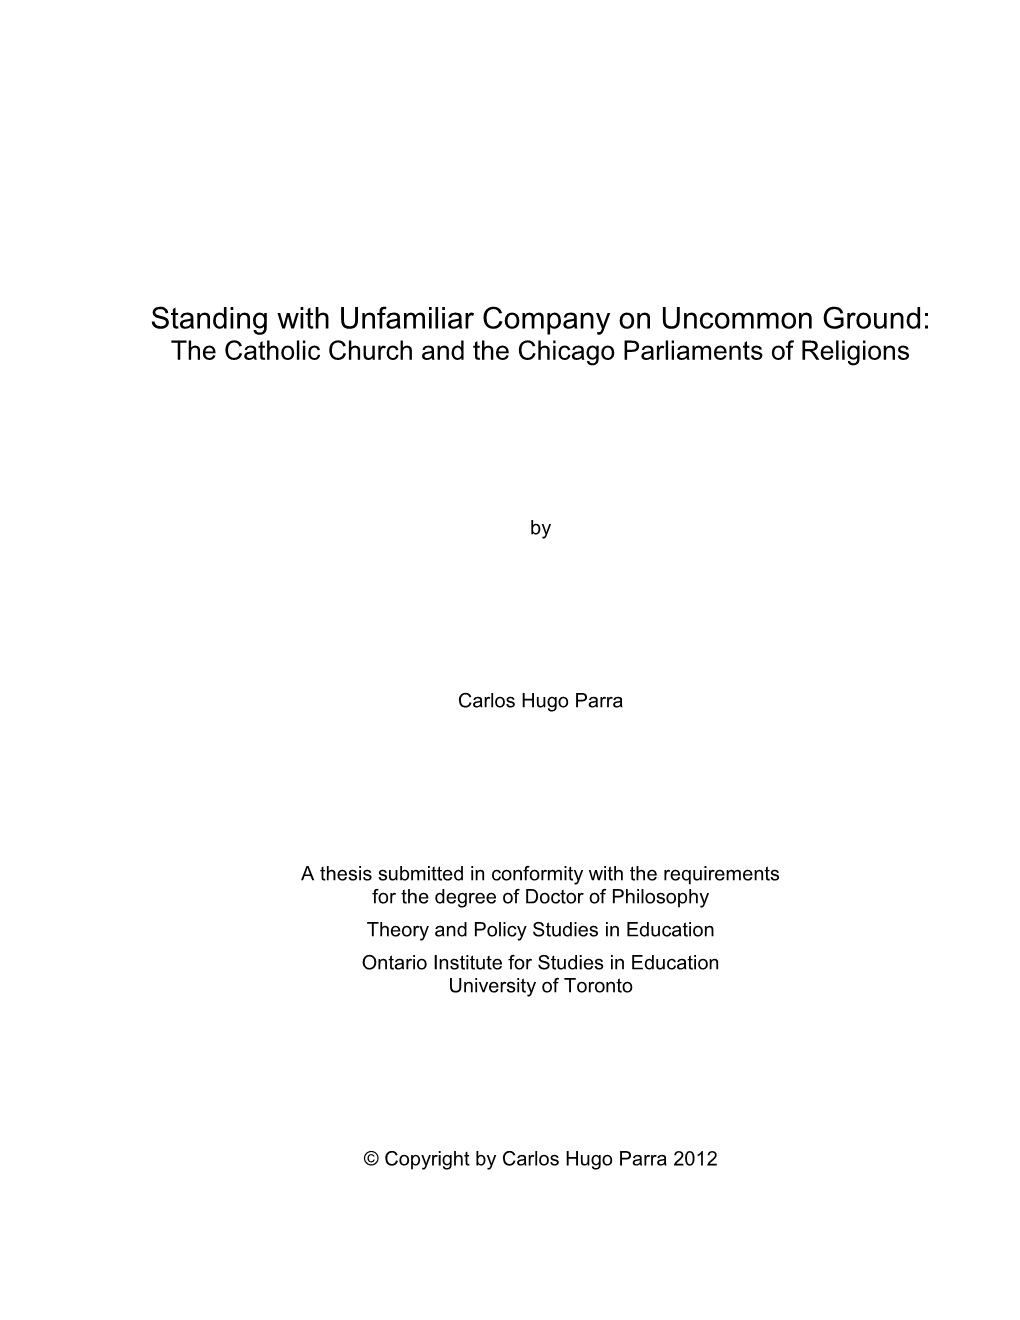 The Catholic Church and the Chicago Parliaments of Religions